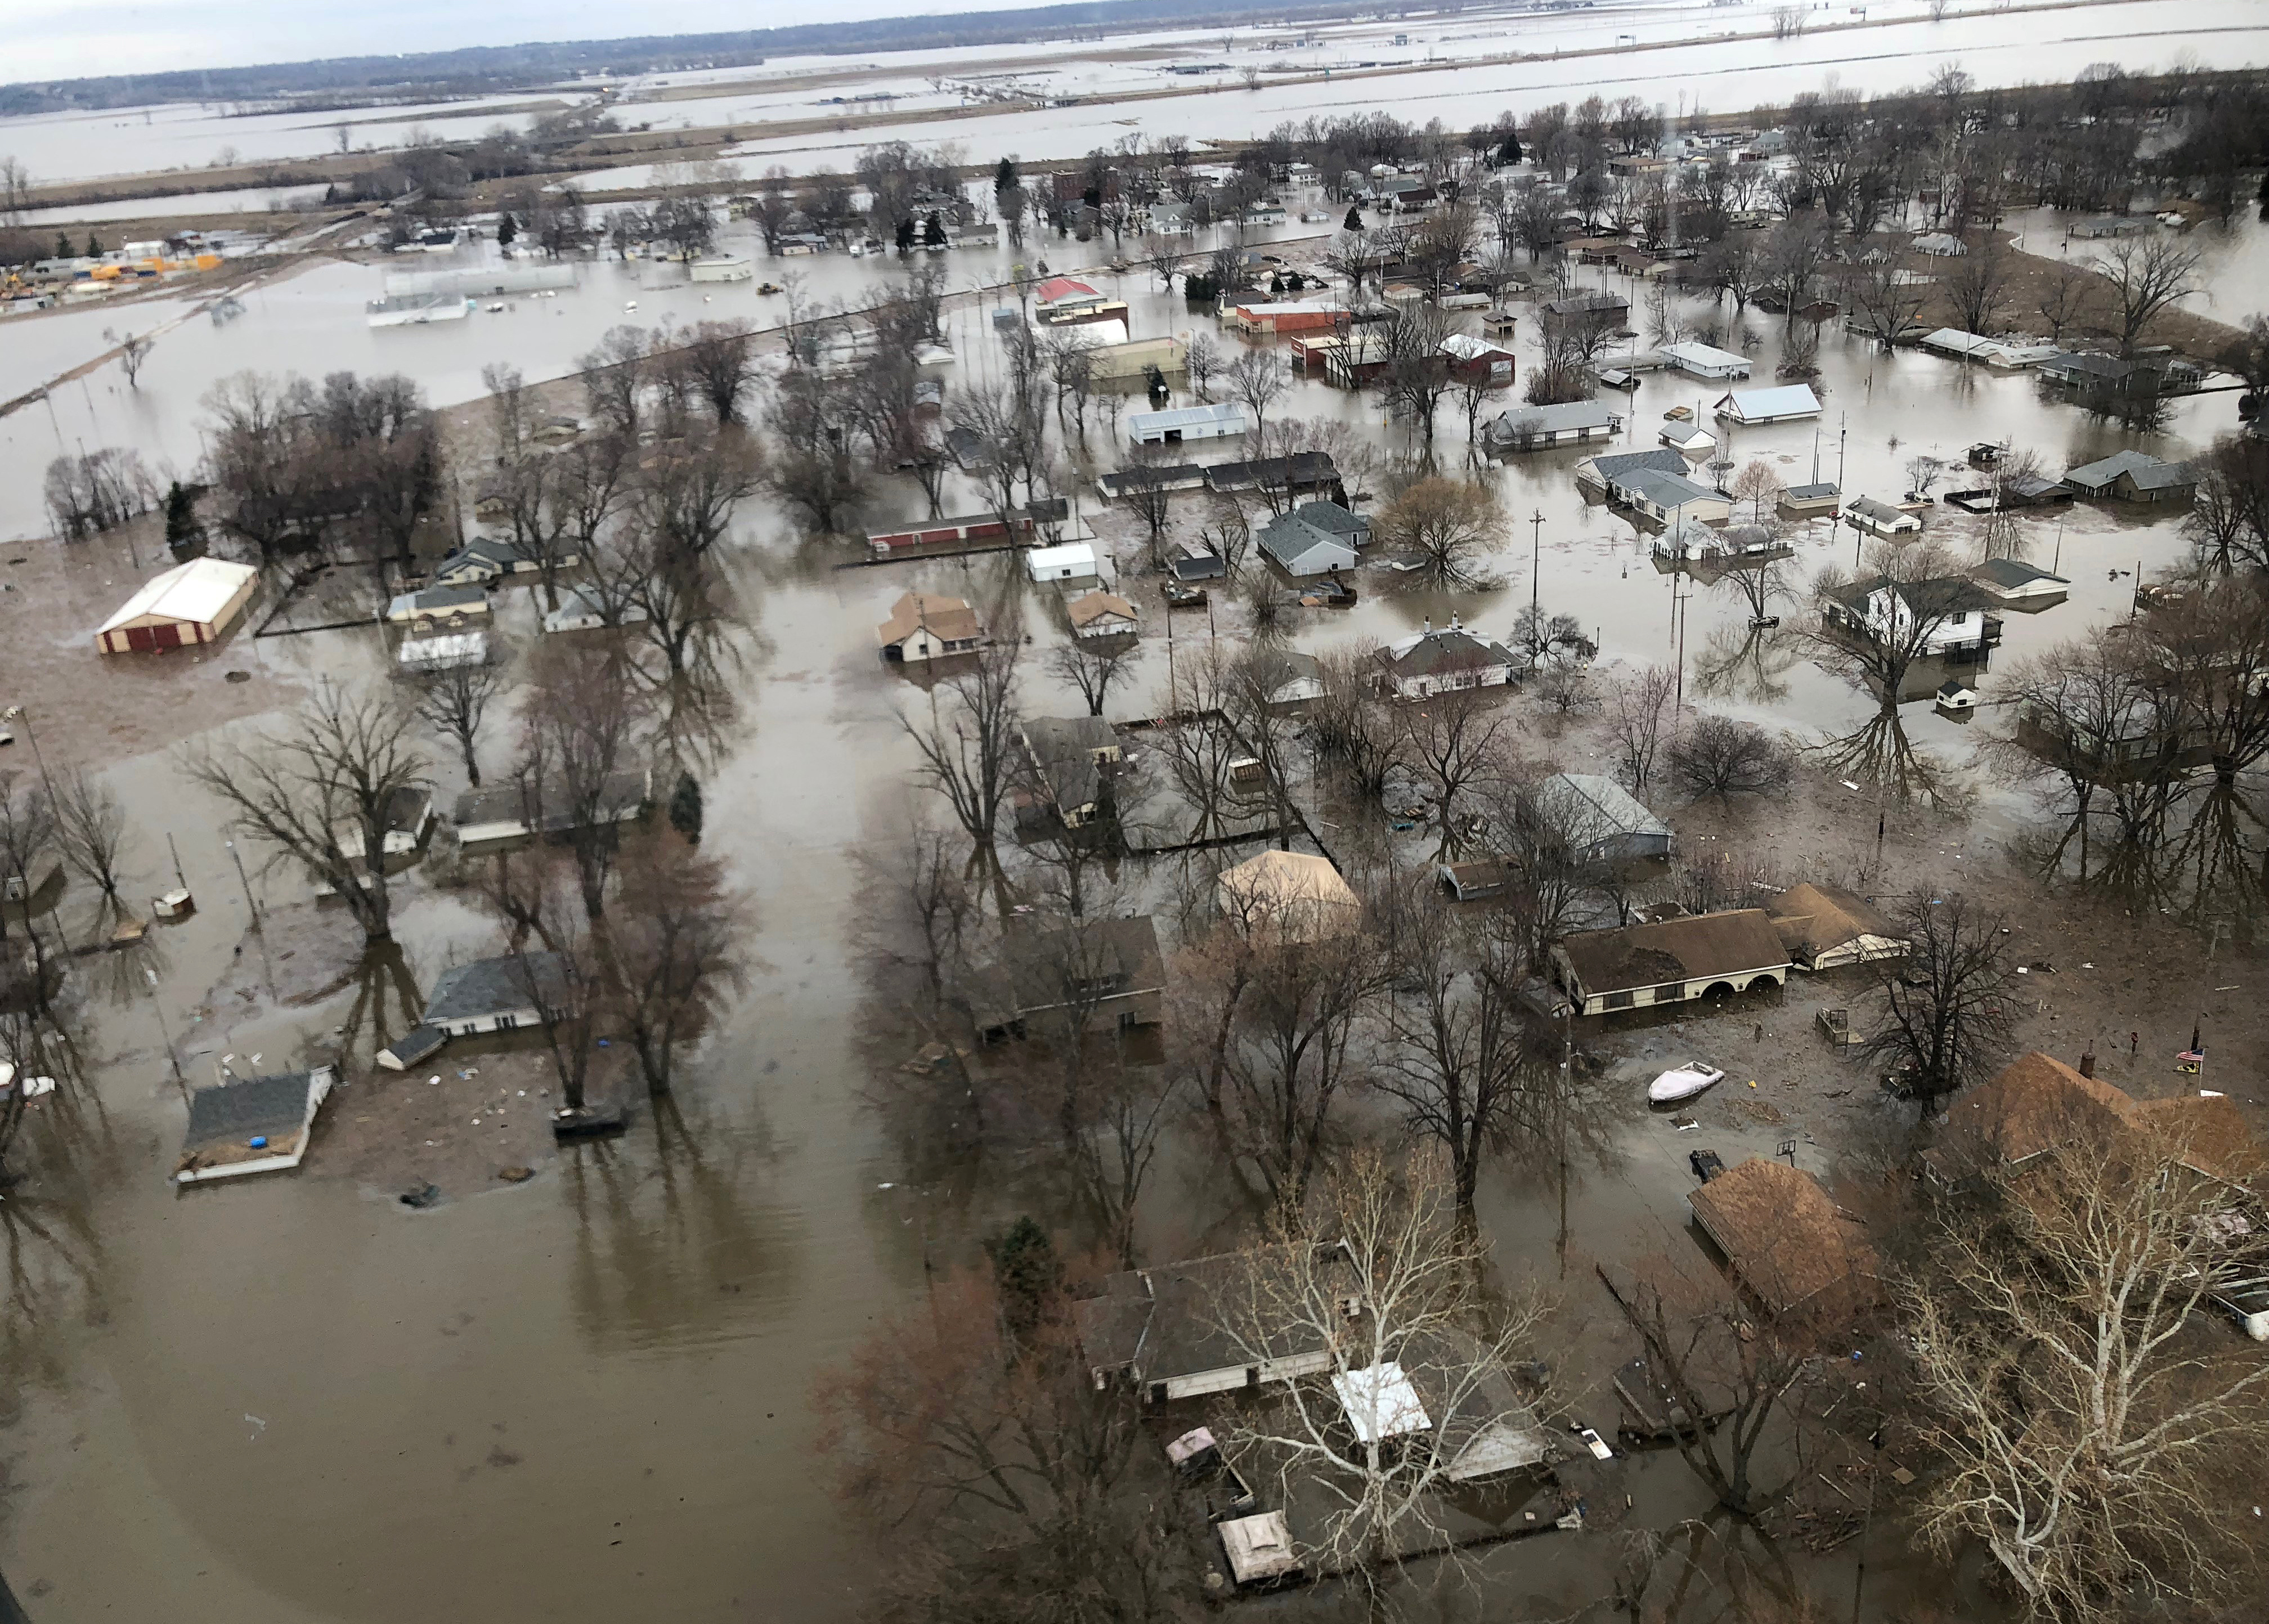 Flood damage is shown in this earial photo in Percival, Iowa, U.S., March 29, 2019. Photo taken March 29, 2019. REUTERS/Tom Polansek